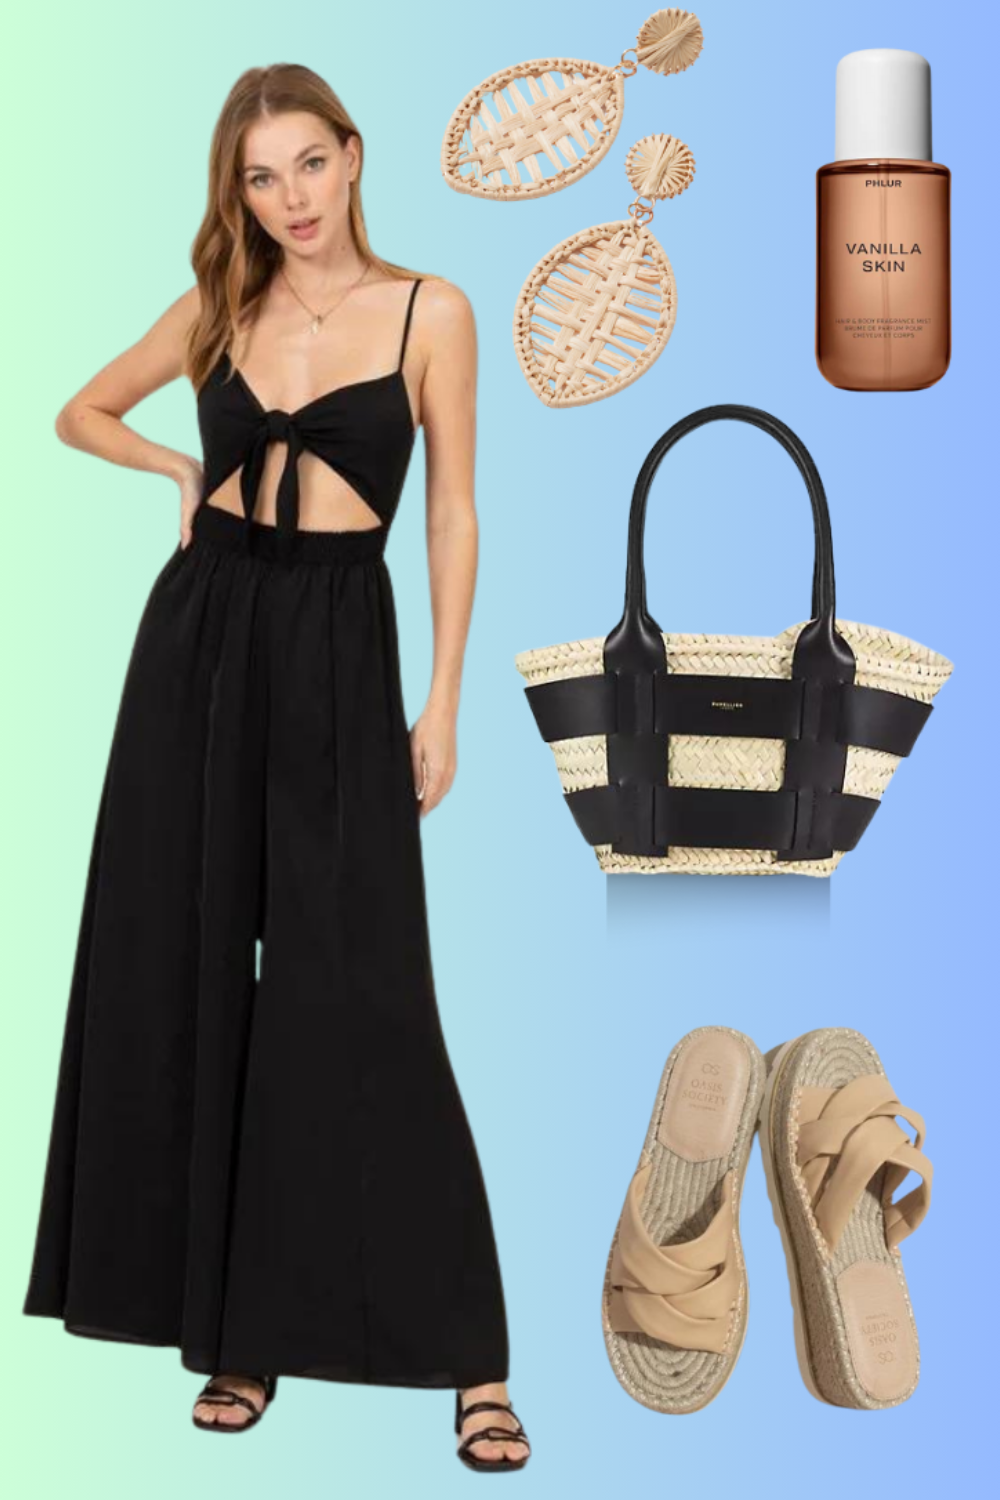 Summer Vacation Dinner Outfit For A Fabulous Evening!